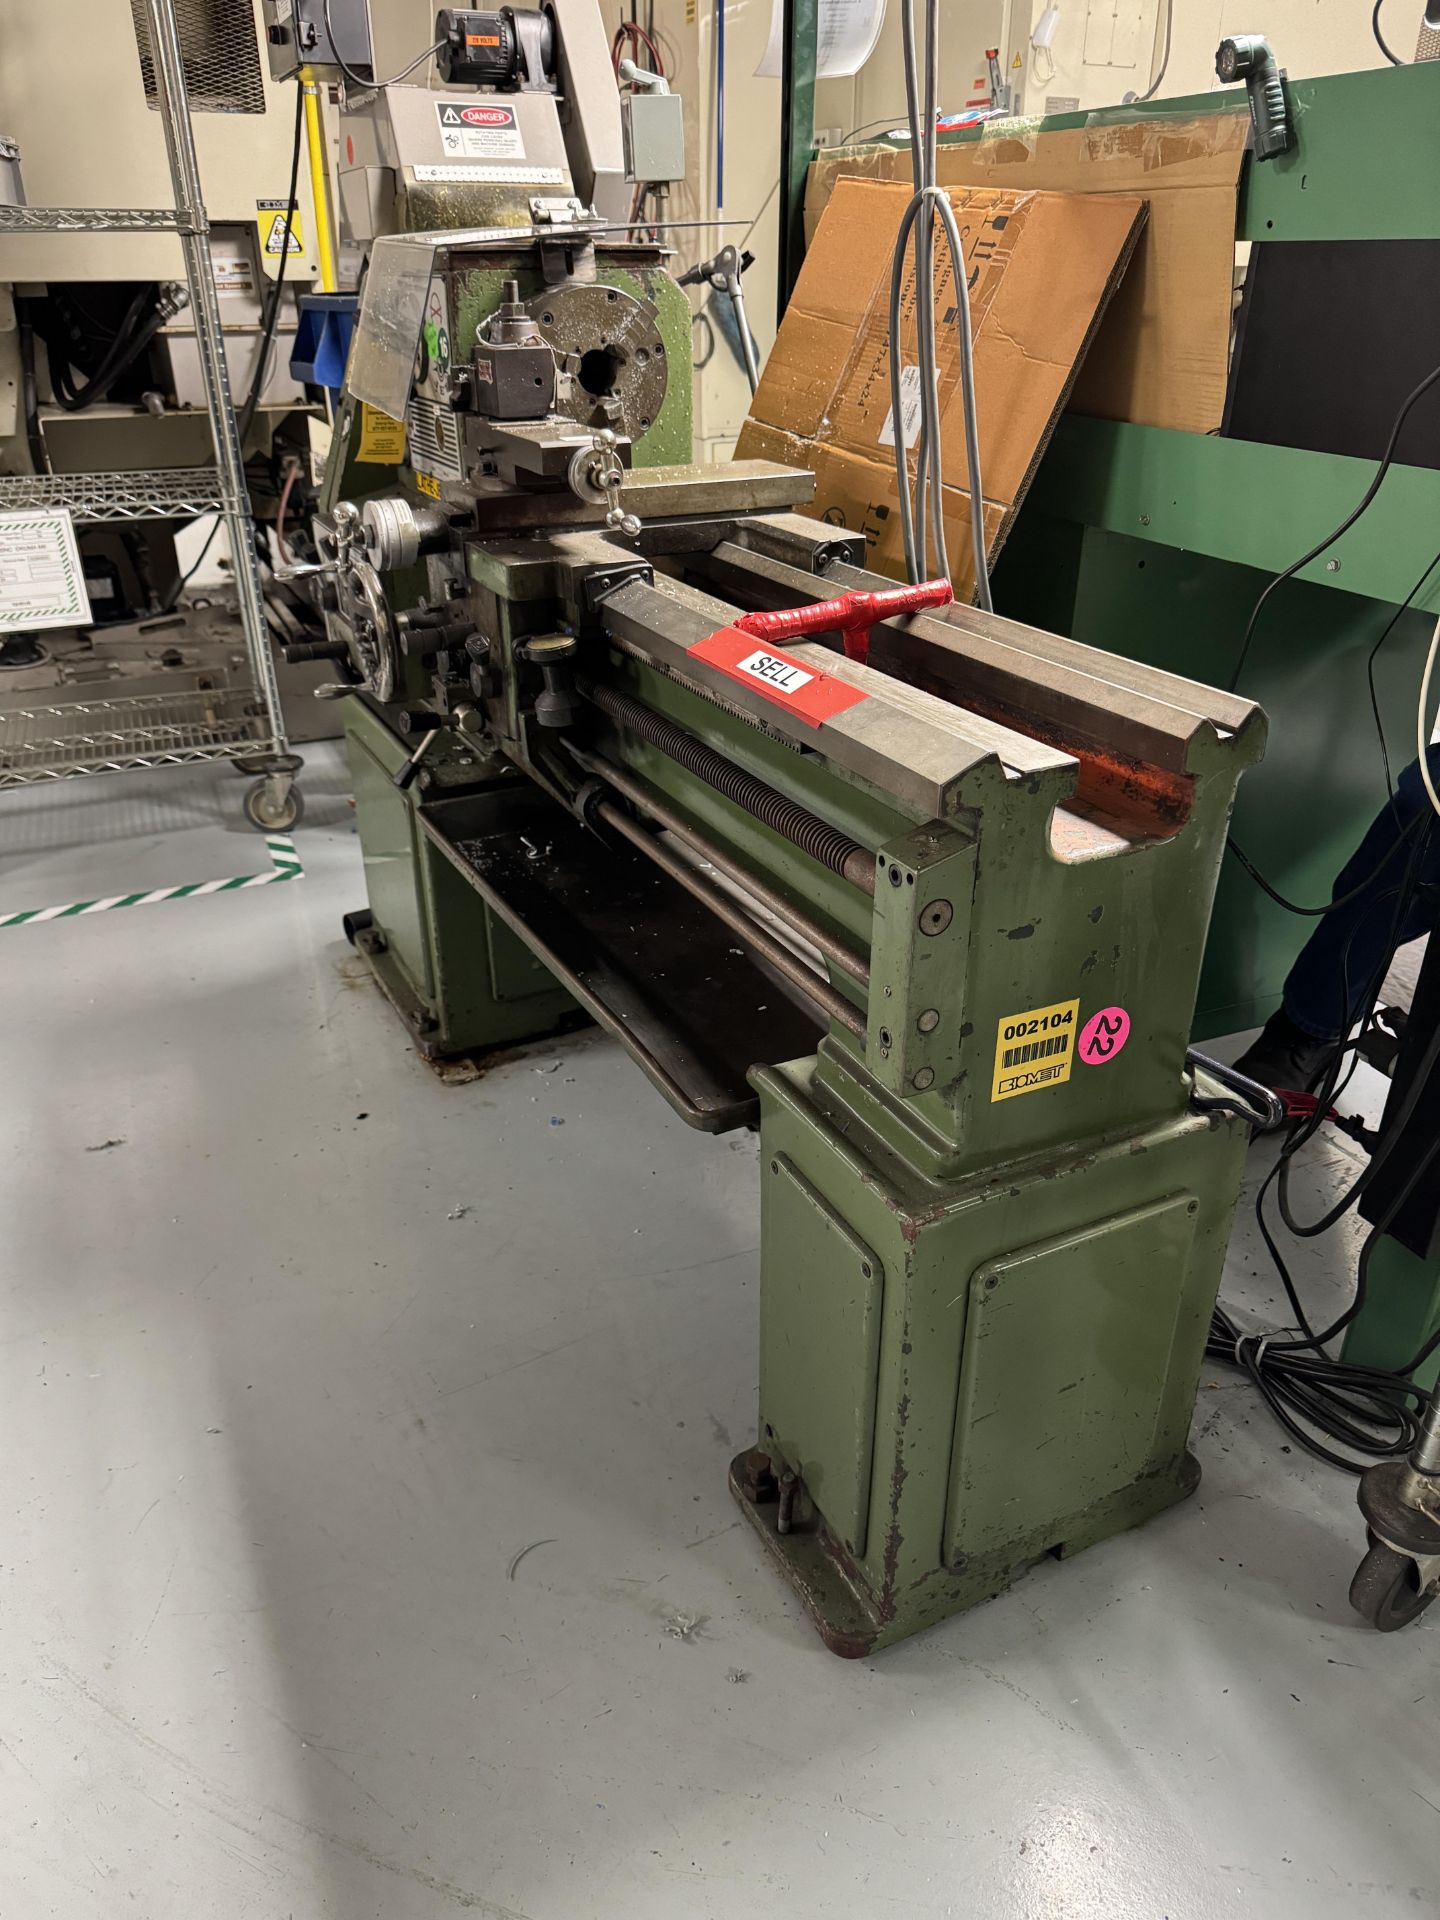 1978 JET 1430 LATHE GAP BED SERIAL # 8128; LENGTH OF BED: 40"; 14" SWING; 3 JAW CHUCK; TOOL POST